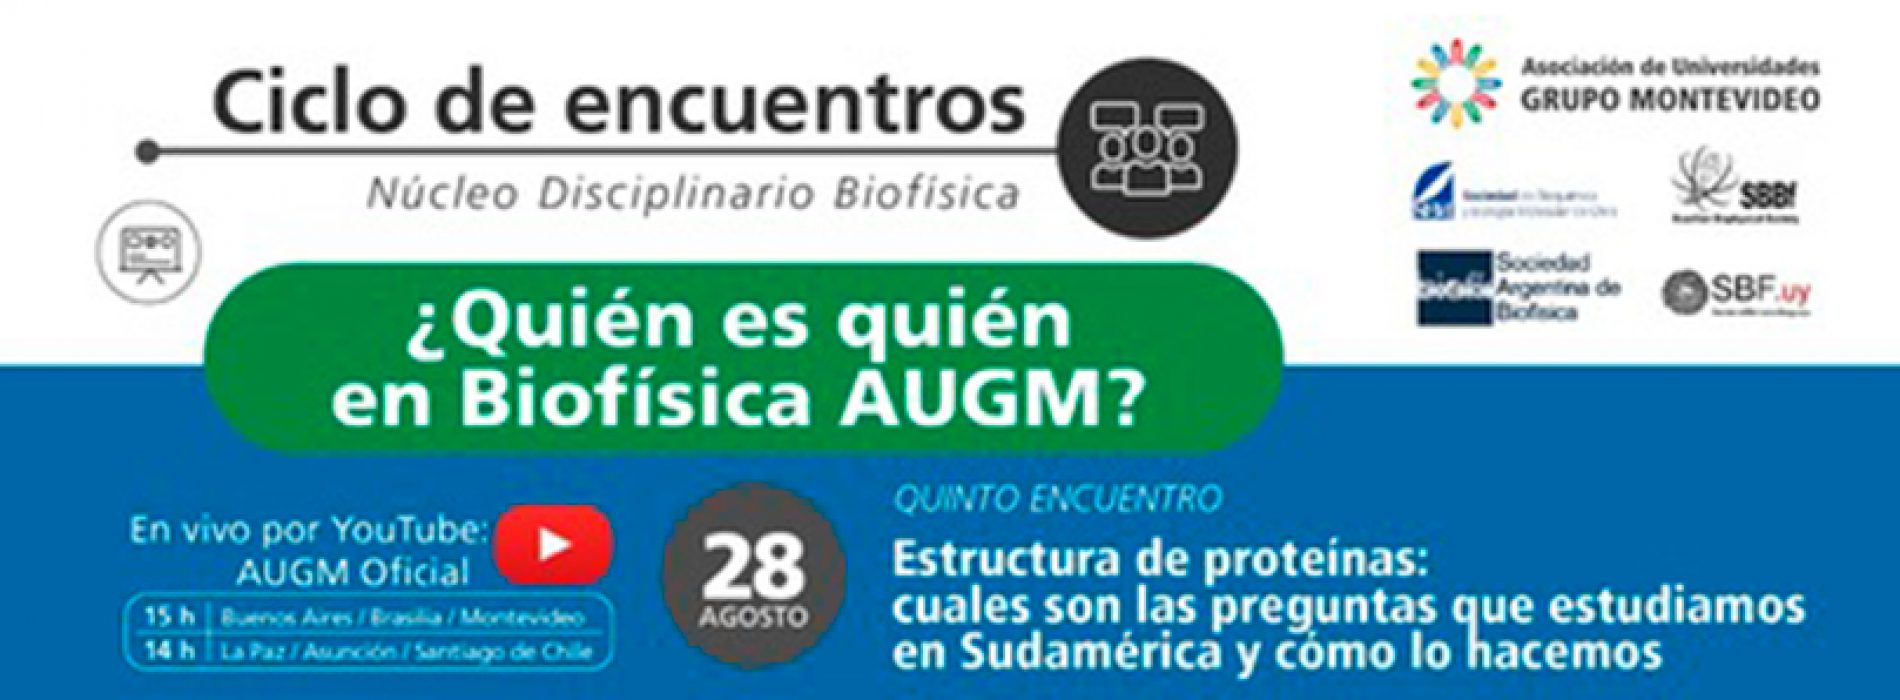 Meeting cycle: Who is who in AUGM Biophysics?